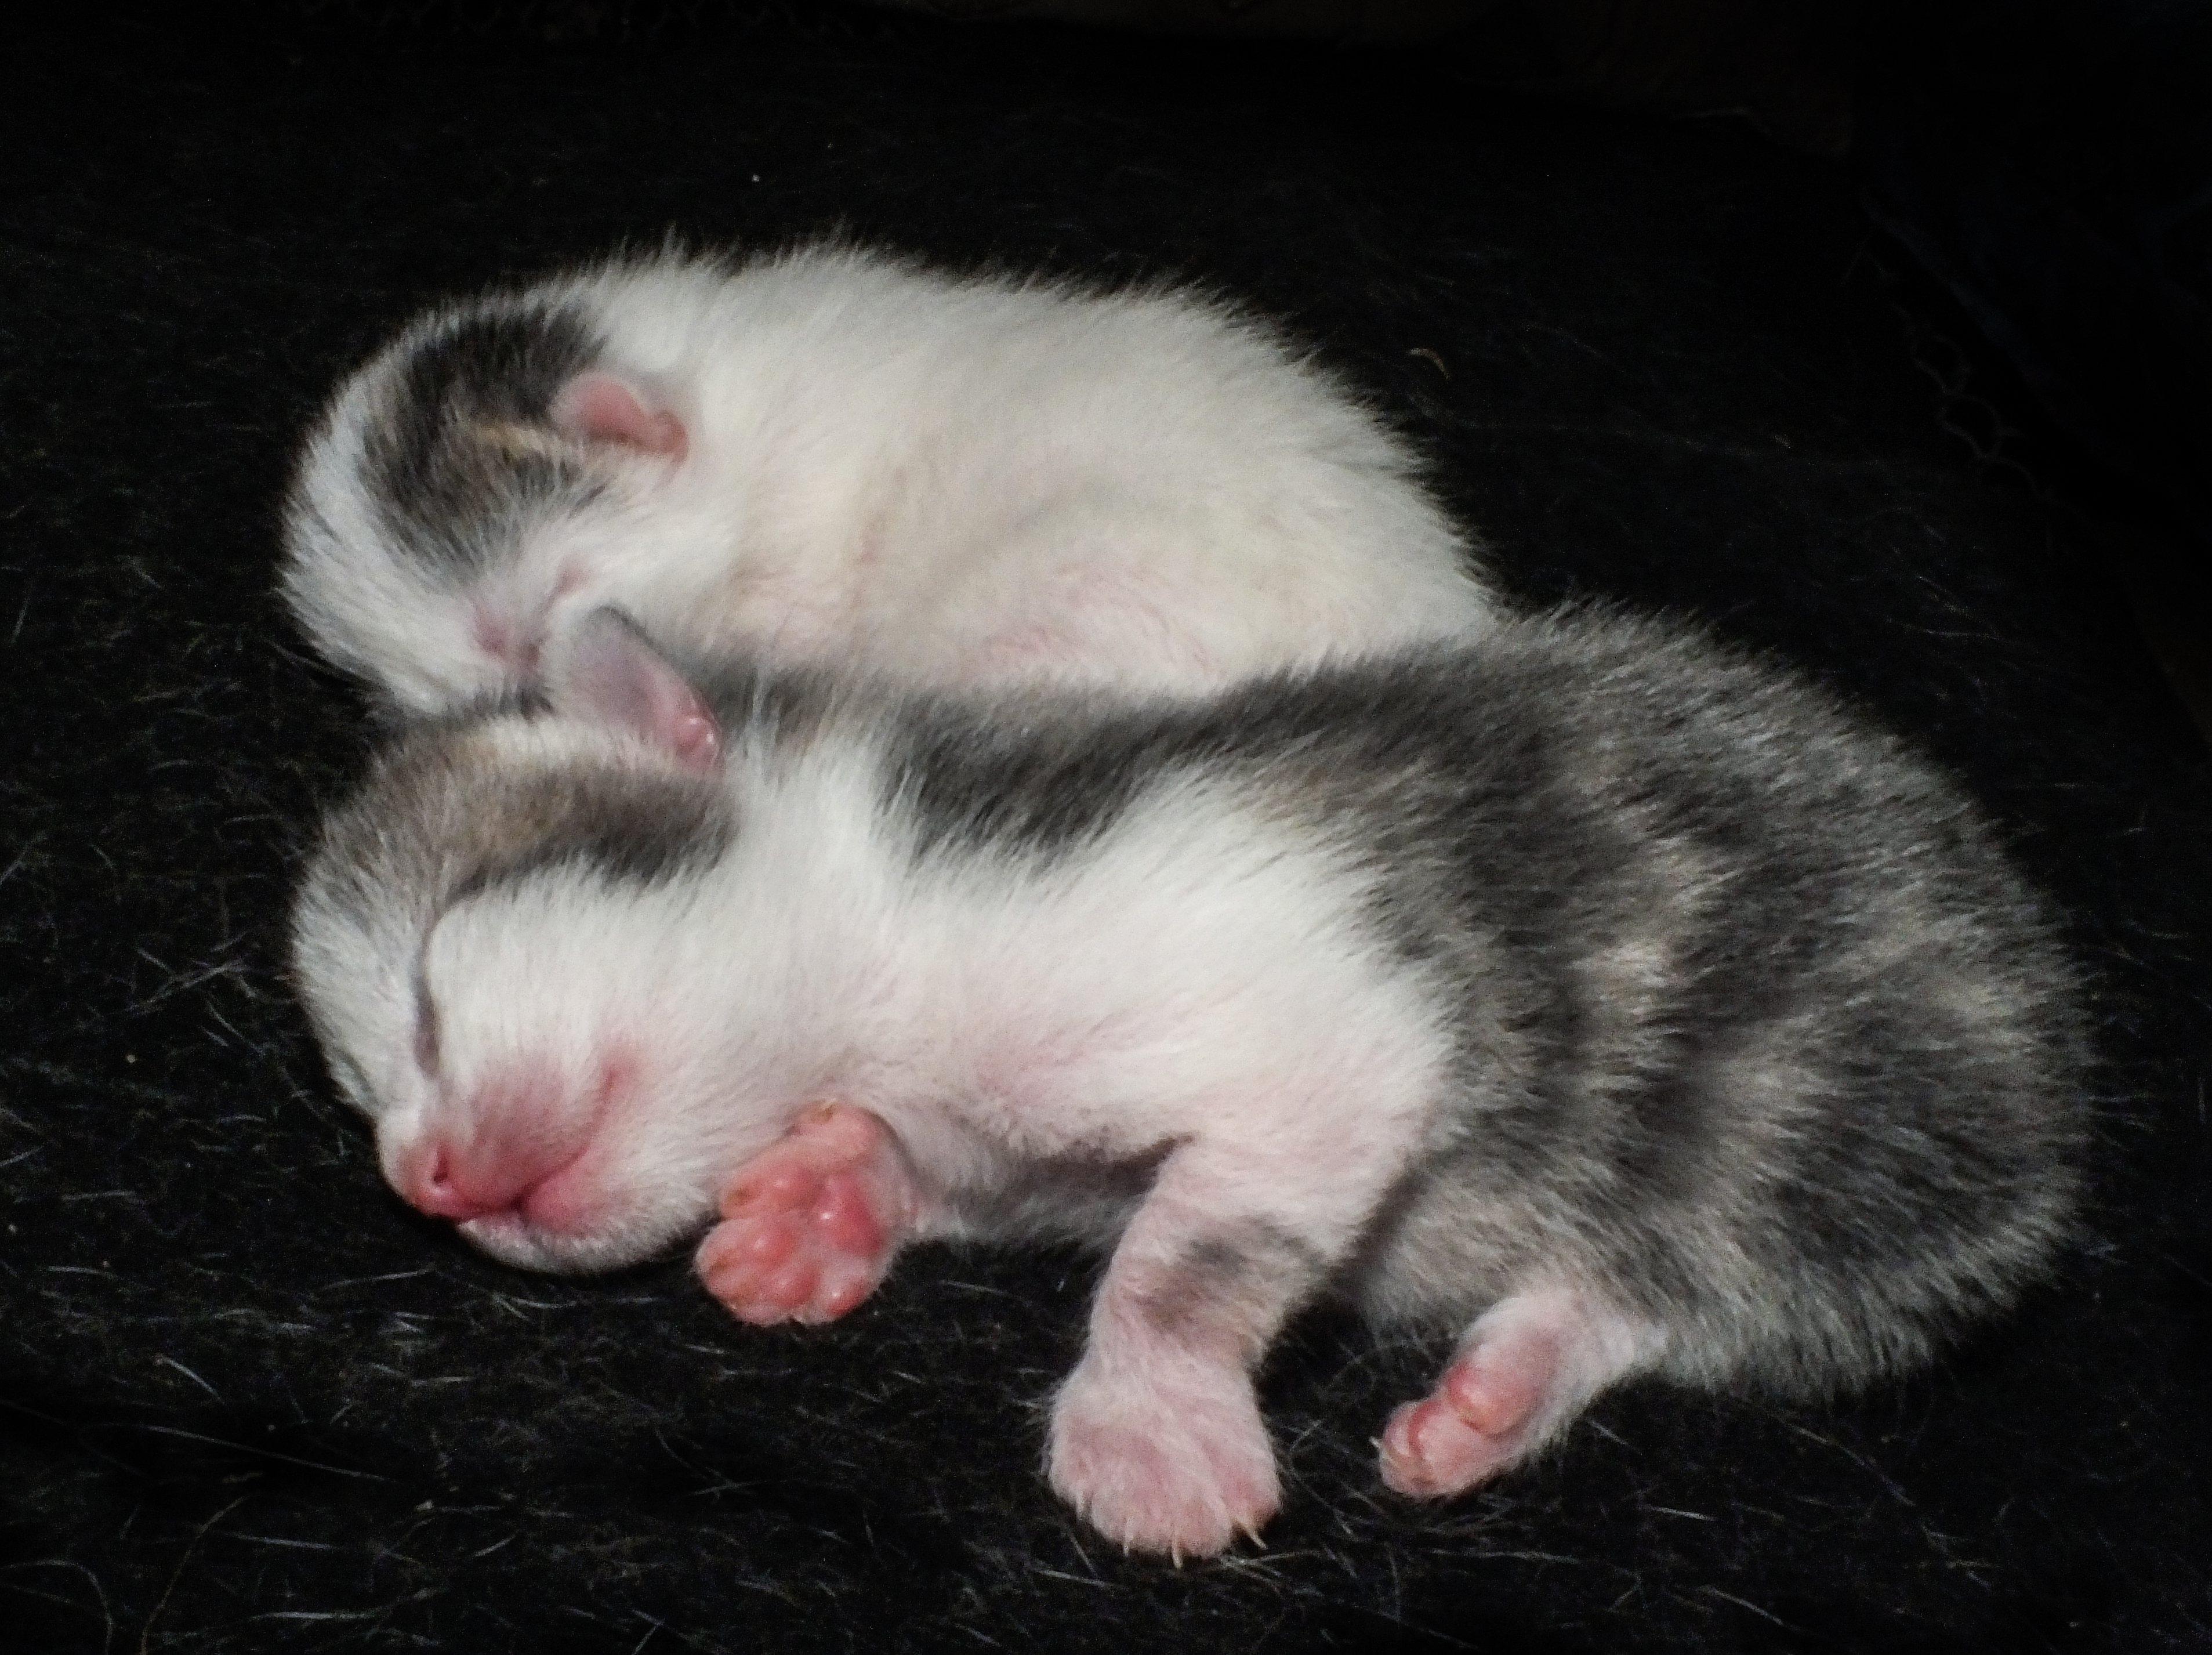 Two 4 day-old kittens